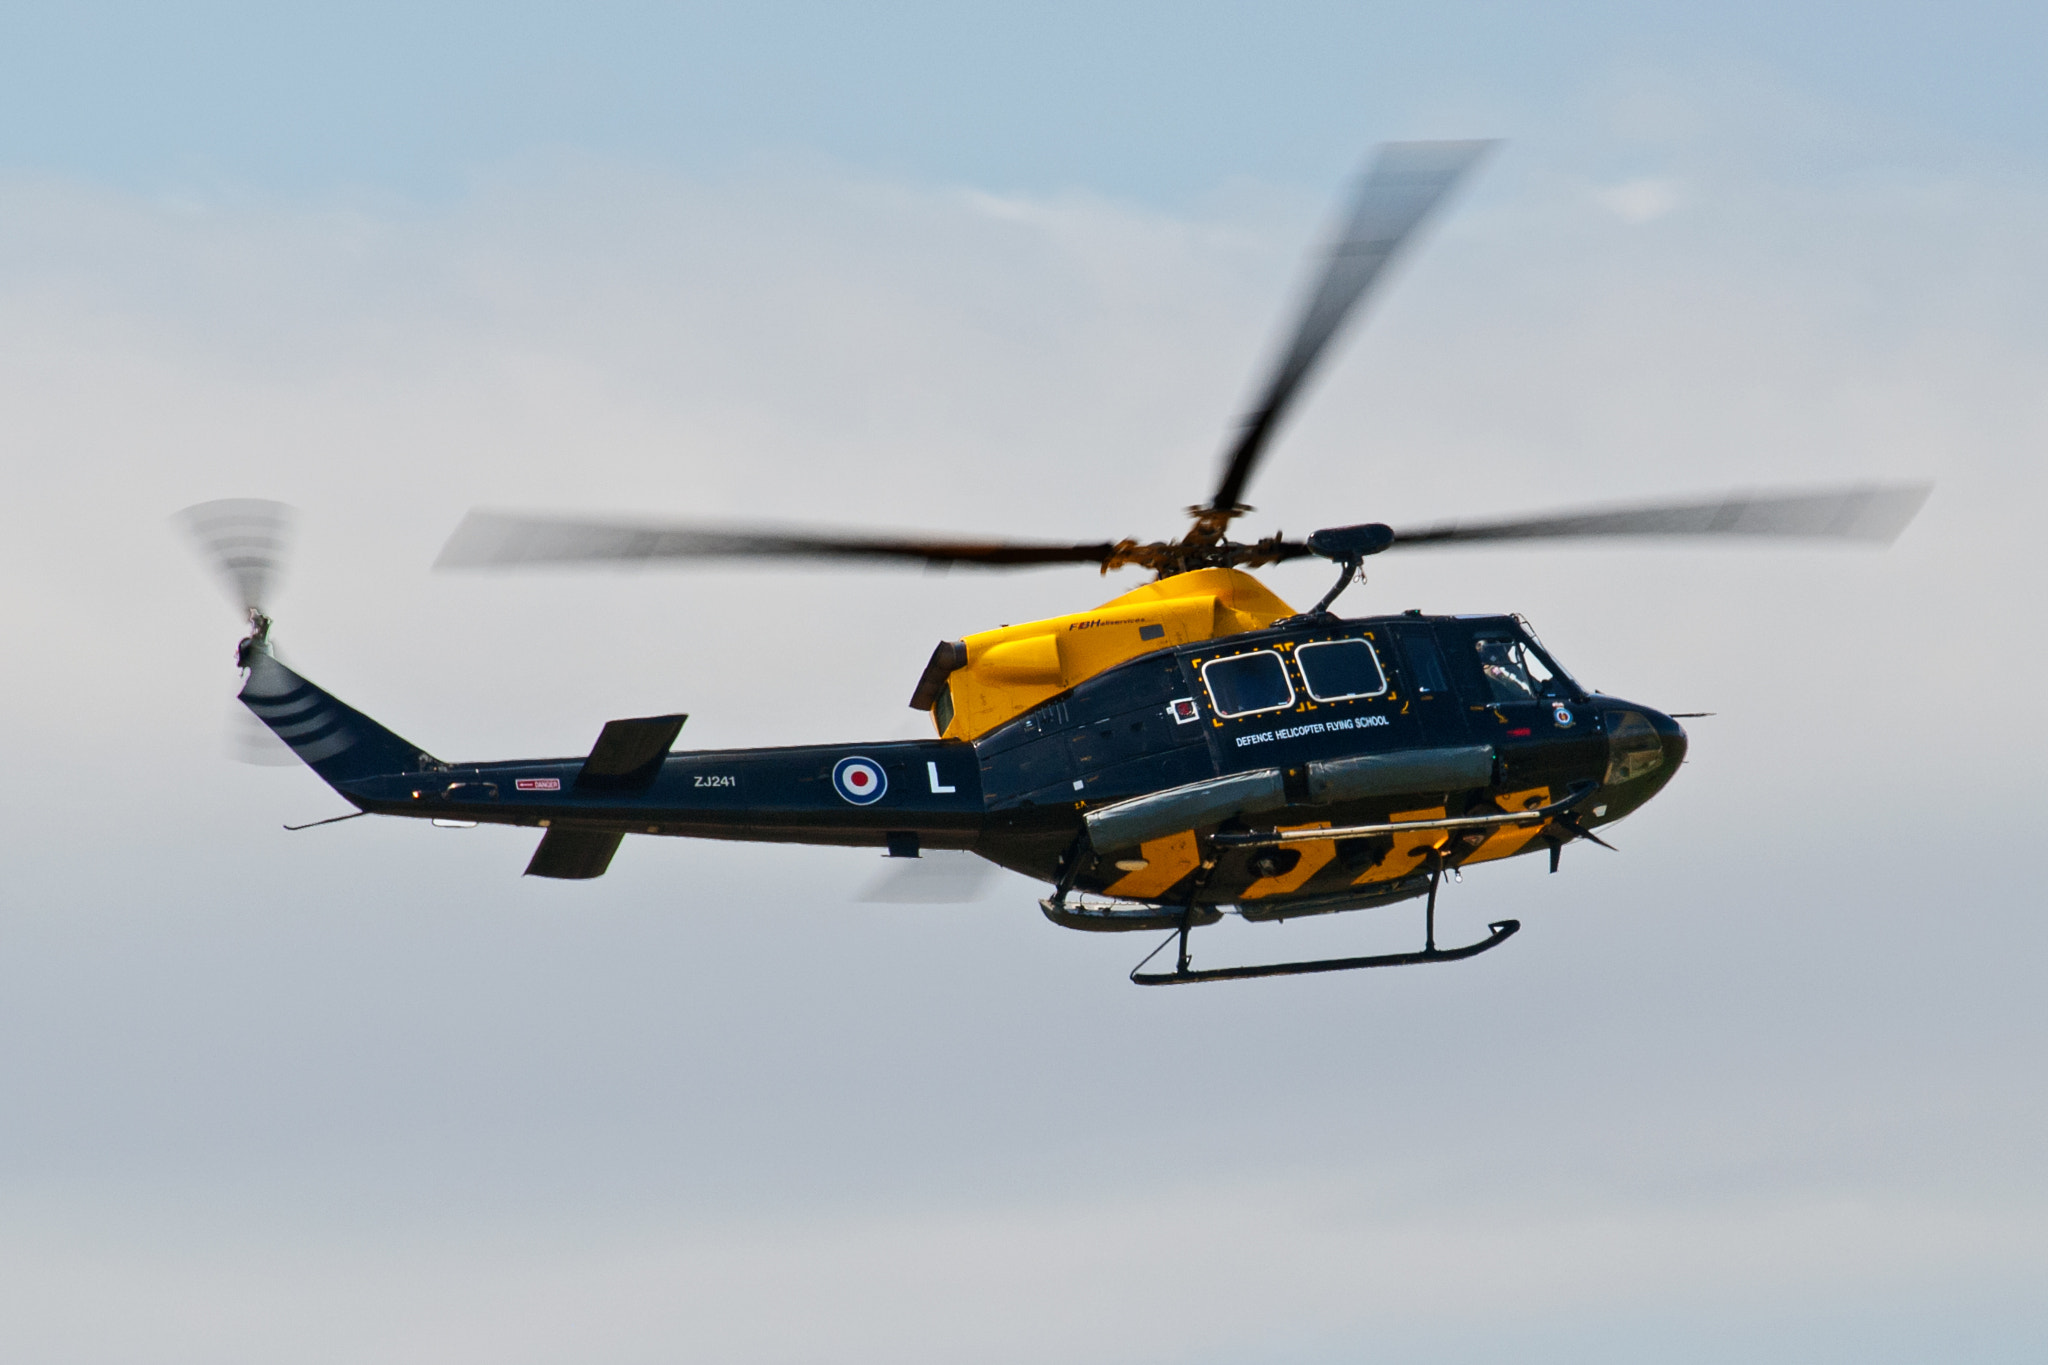 Nikon D200 + Sigma 70-300mm F4-5.6 DG OS sample photo. Defense helicopter flying school photography